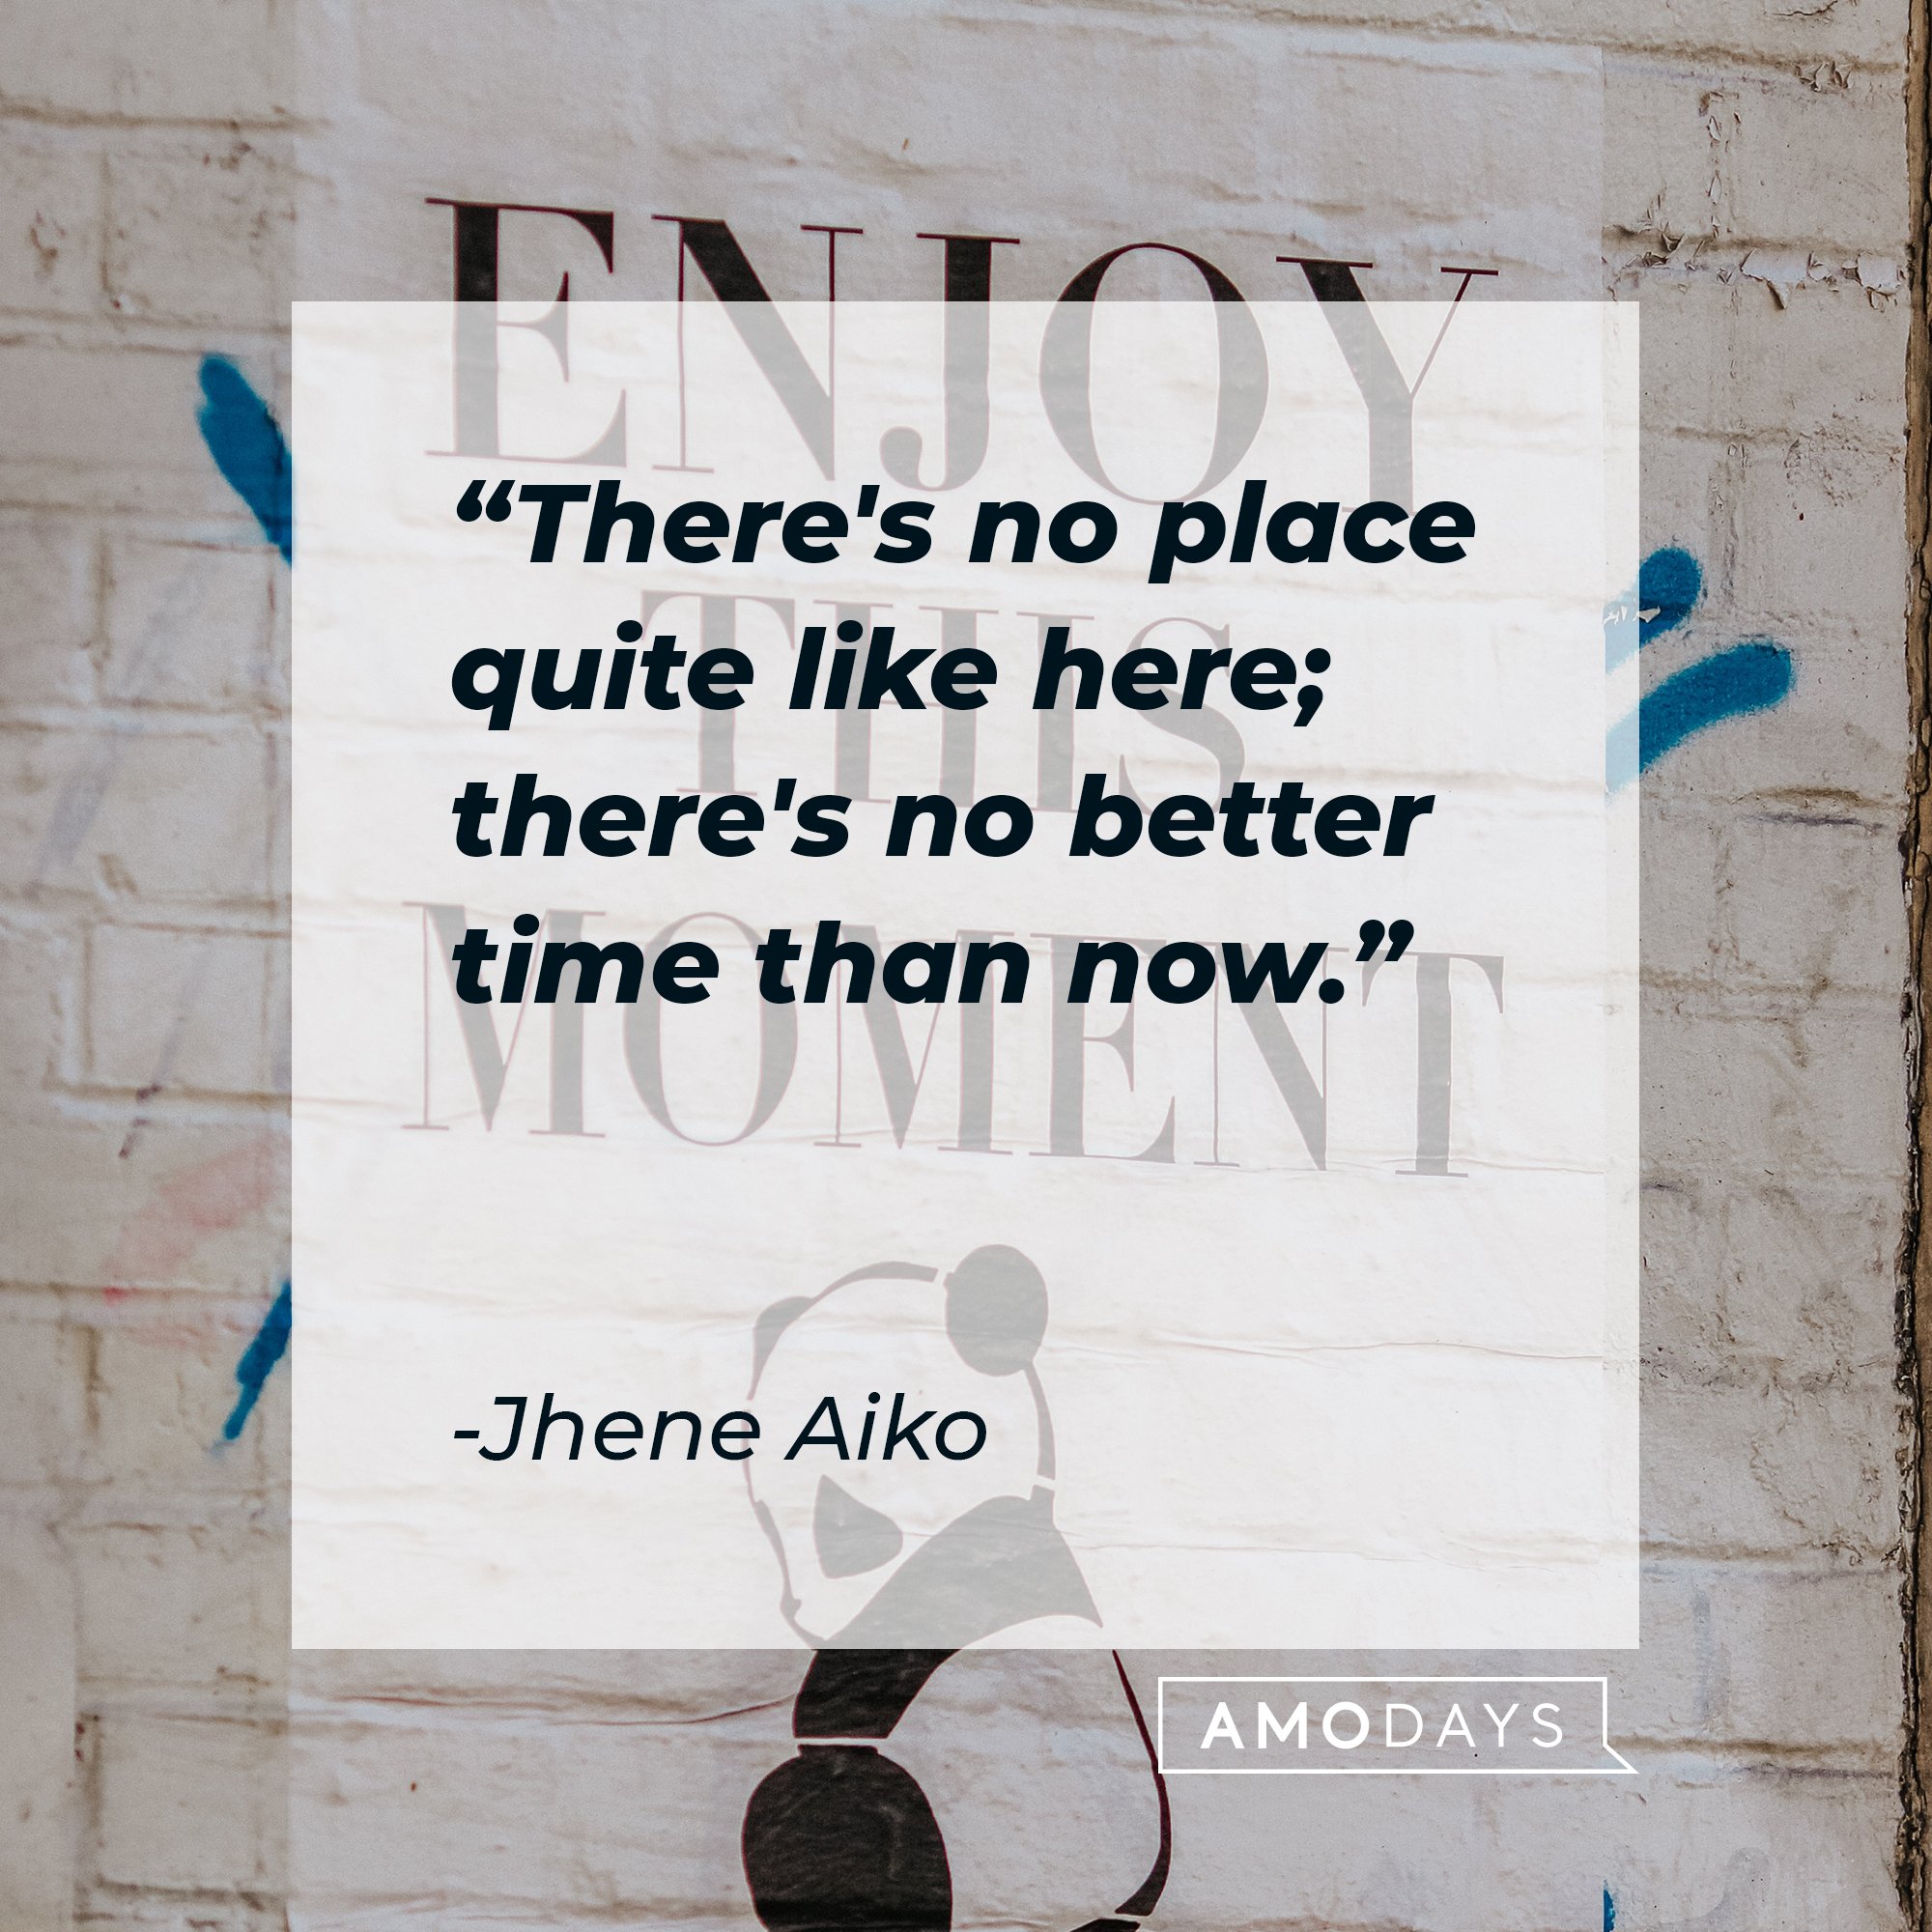  Jhene Aiko's quote: "There's no place quite like here; there's no better time than now." | Image: AmoDays